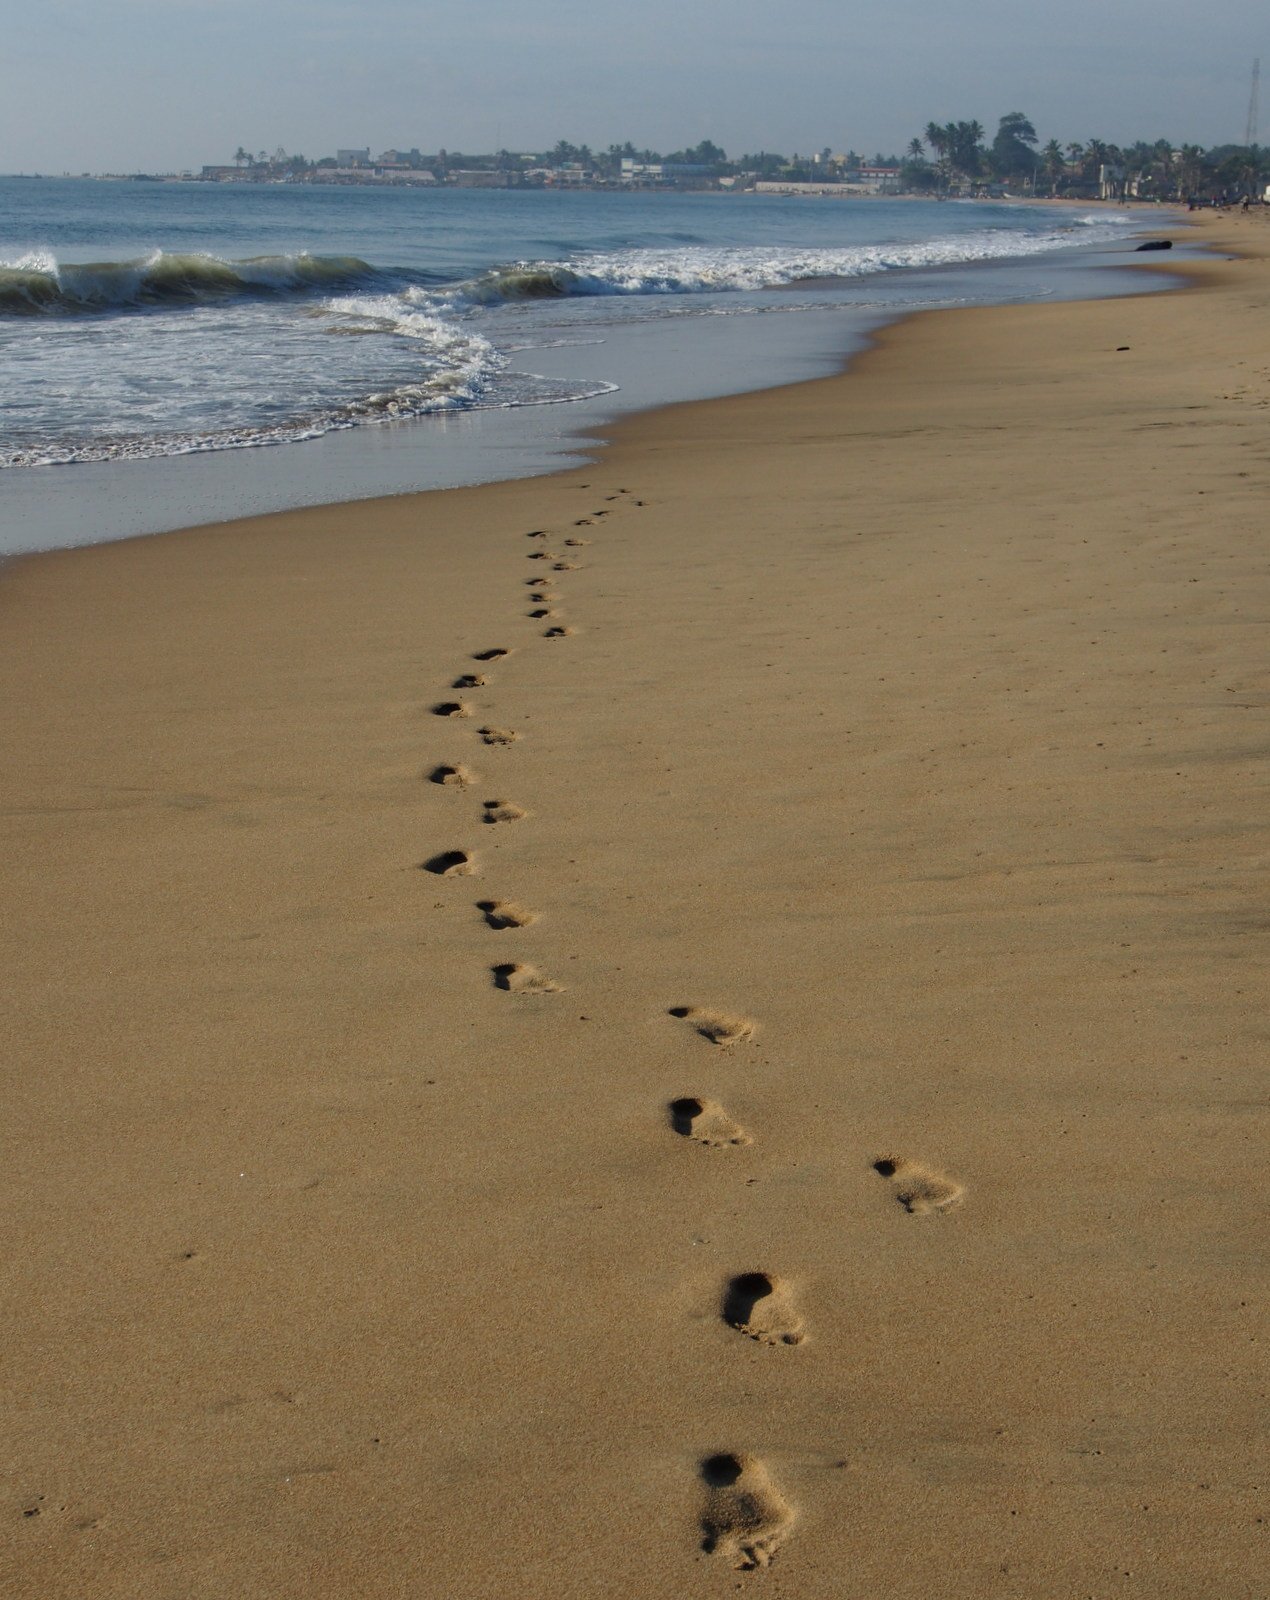 Footsteps on the beach quotes Footsteps in the sand sukanya ramanujan